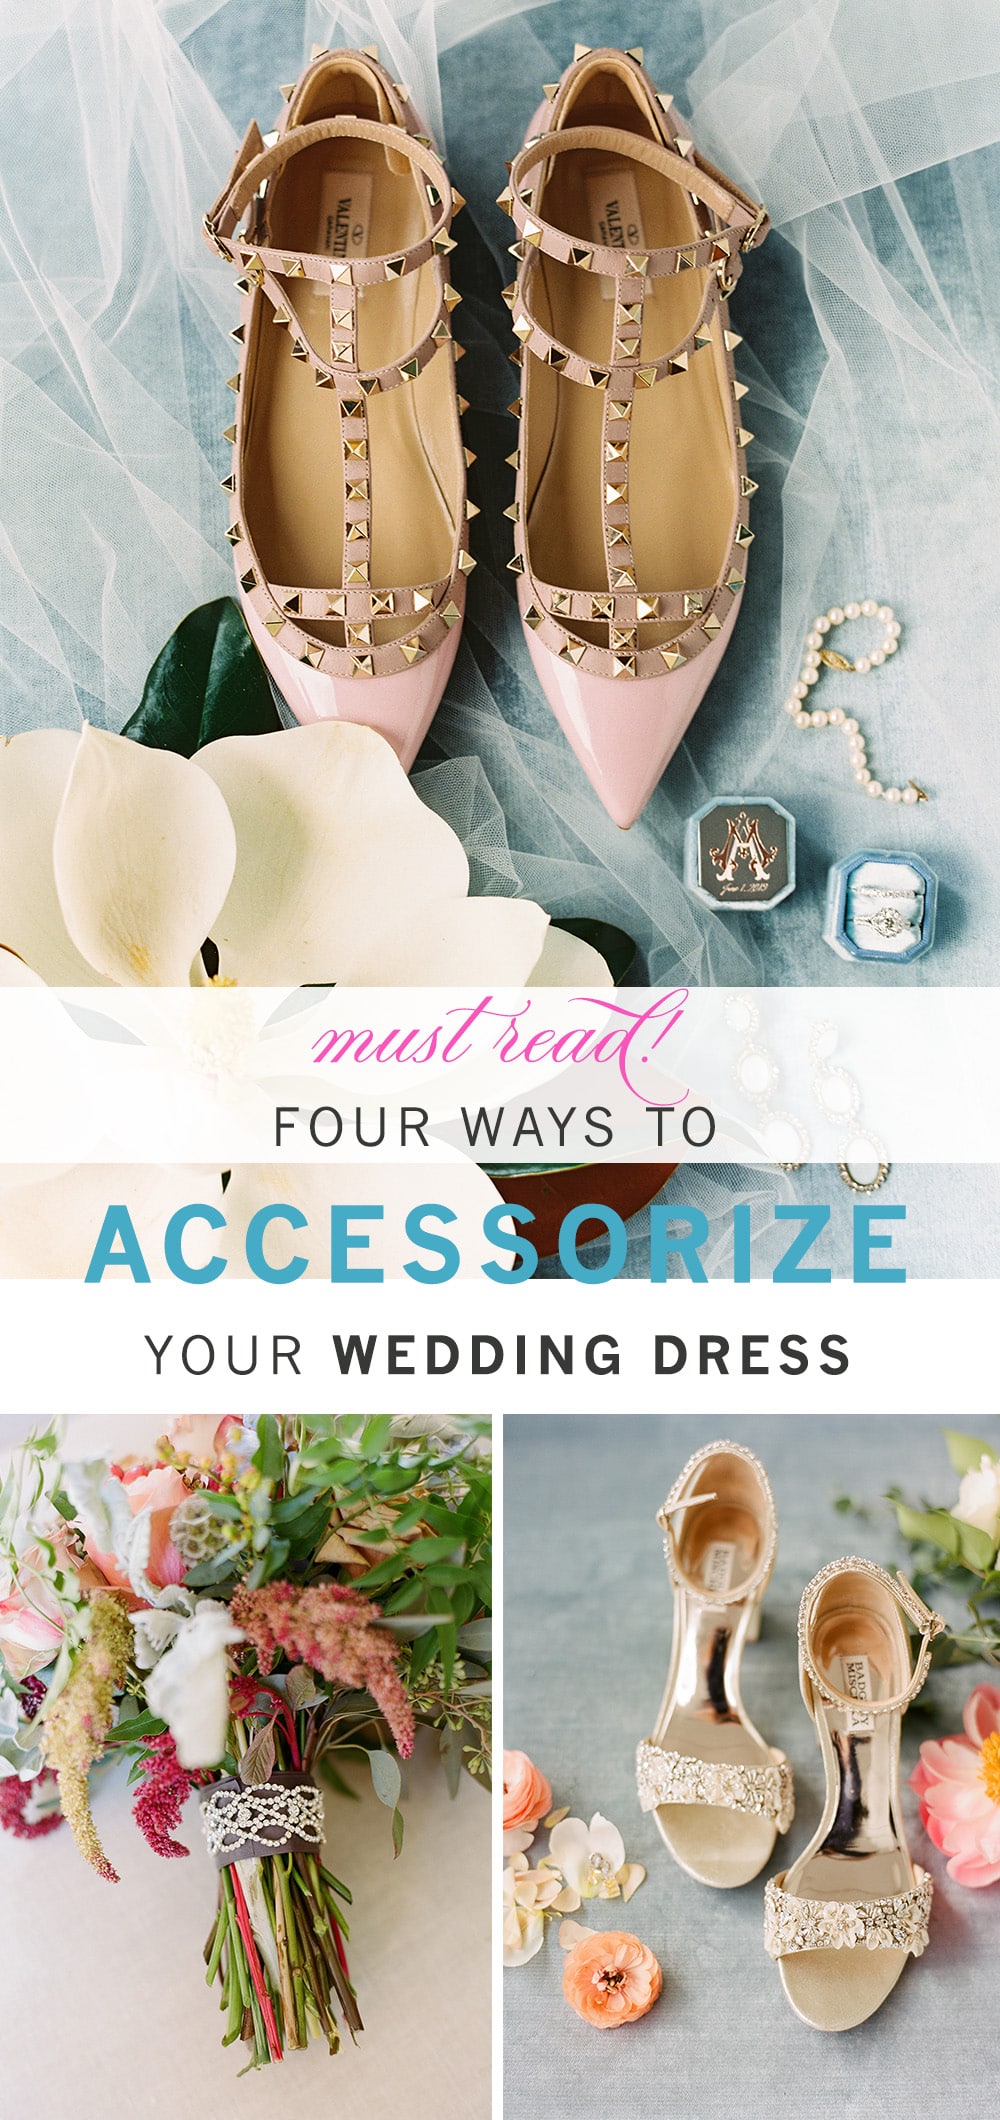 Four Unique Statement Accessories You Can Wear on Your Wedding Day